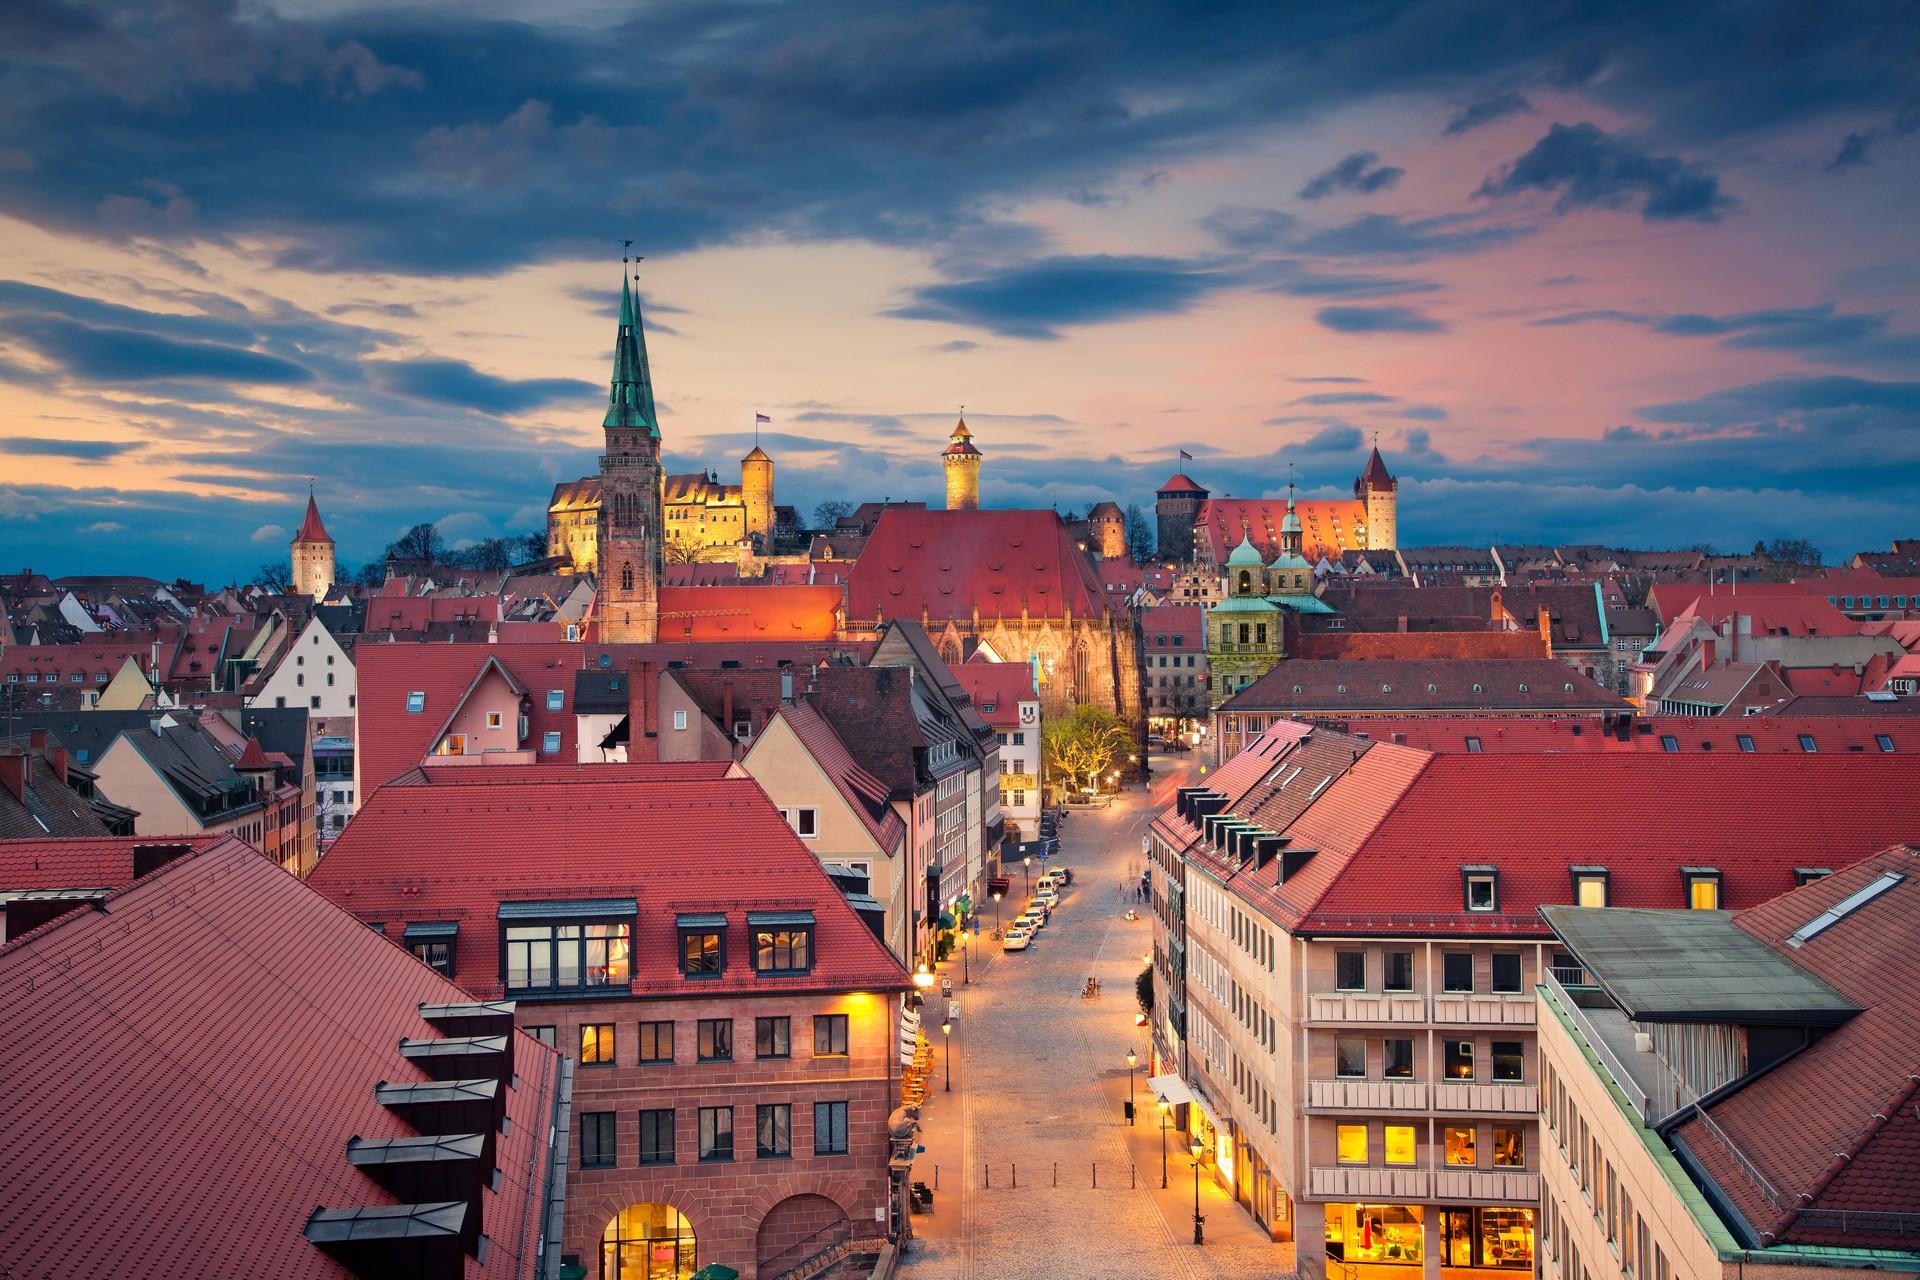 Architecture in Nürnberg at sunset time